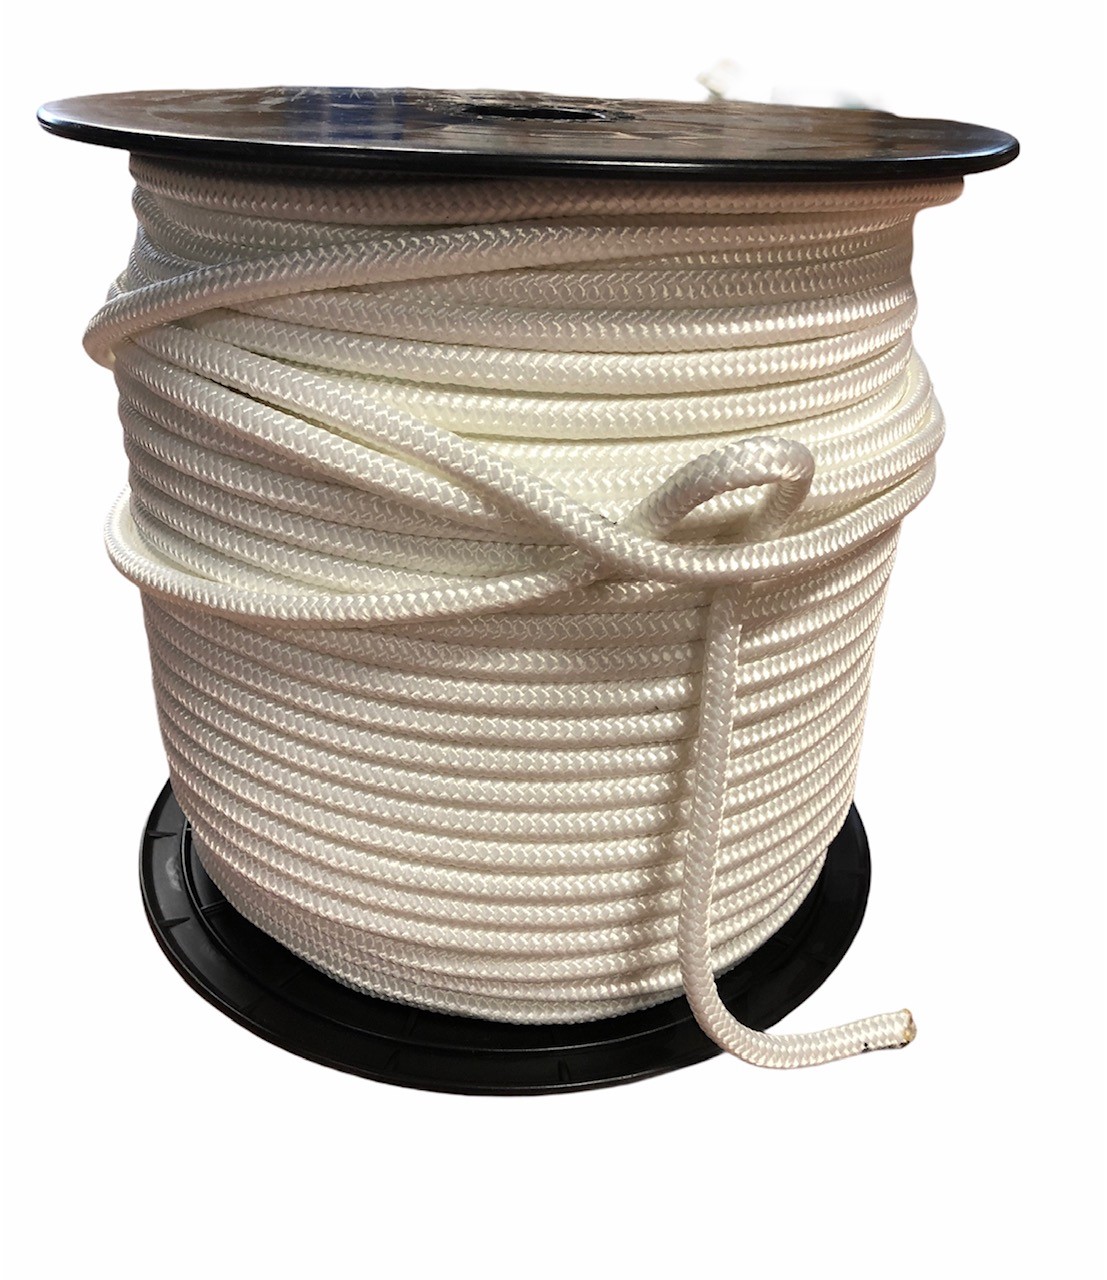 https://www.ribolanetting.com/storage/2870/Polyester-rope-8mm.webp